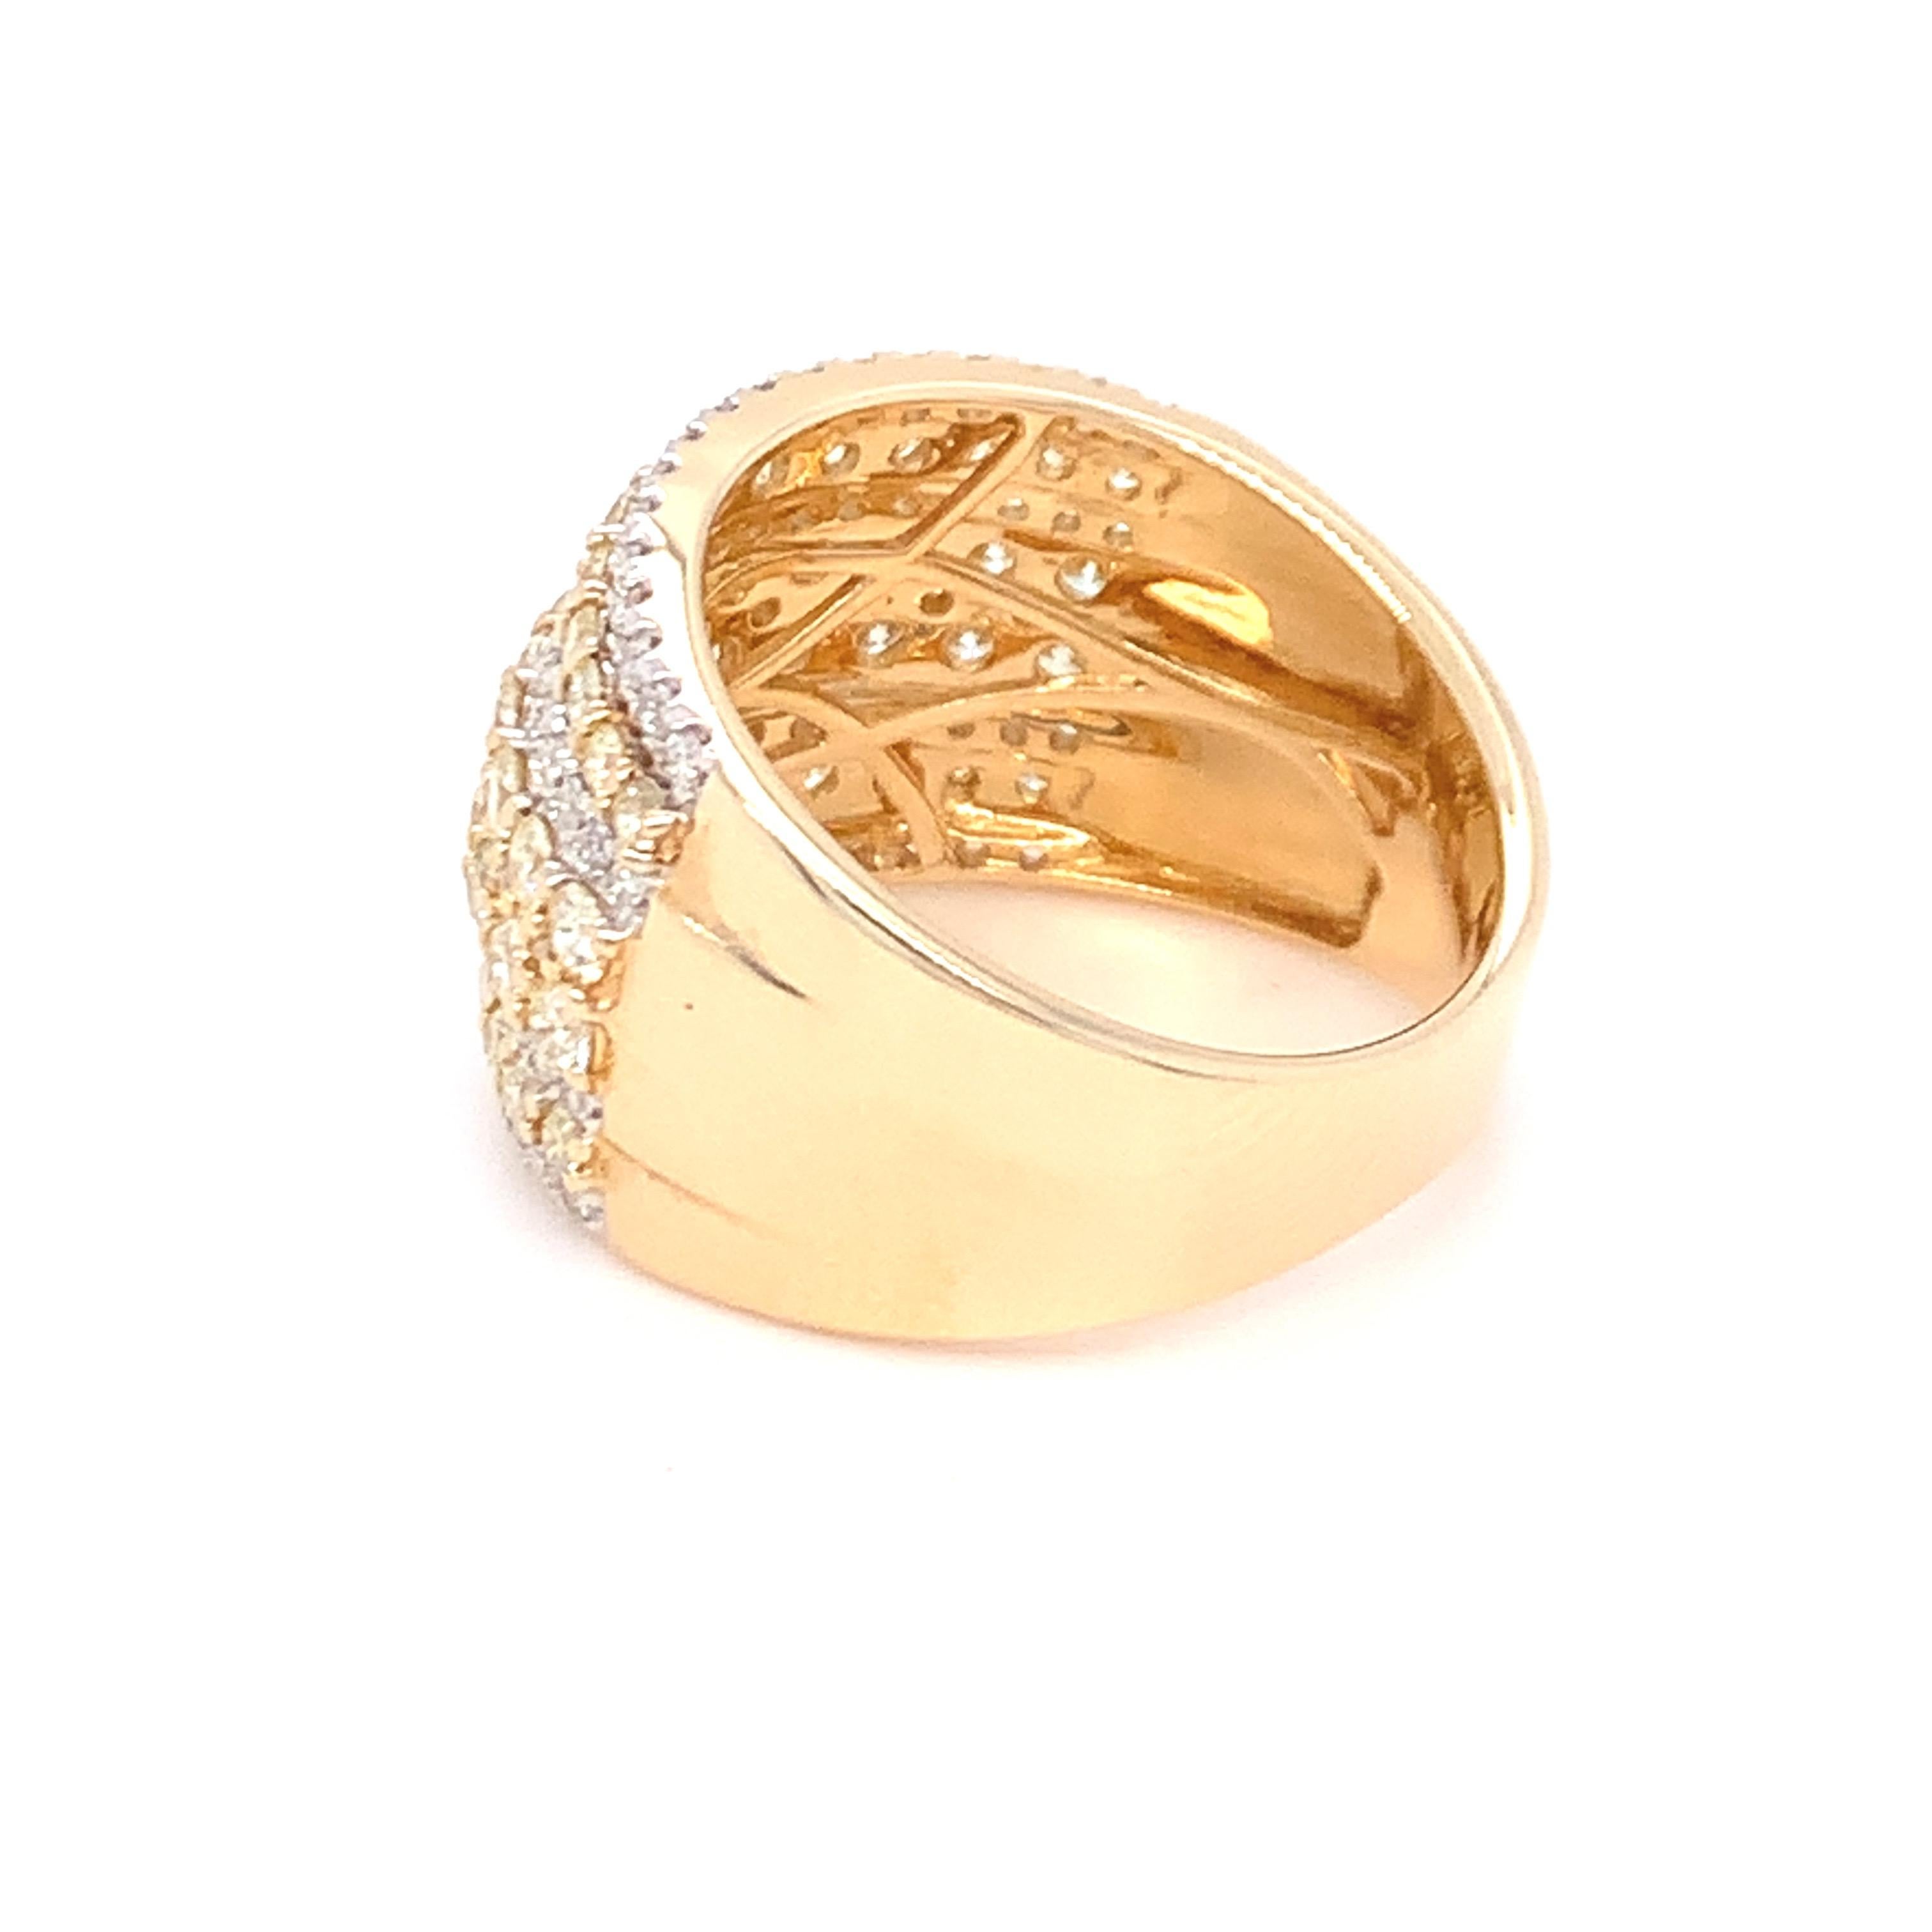 2.08 Carat Diamond Band Ring in 14k Yellow Gold For Sale 7